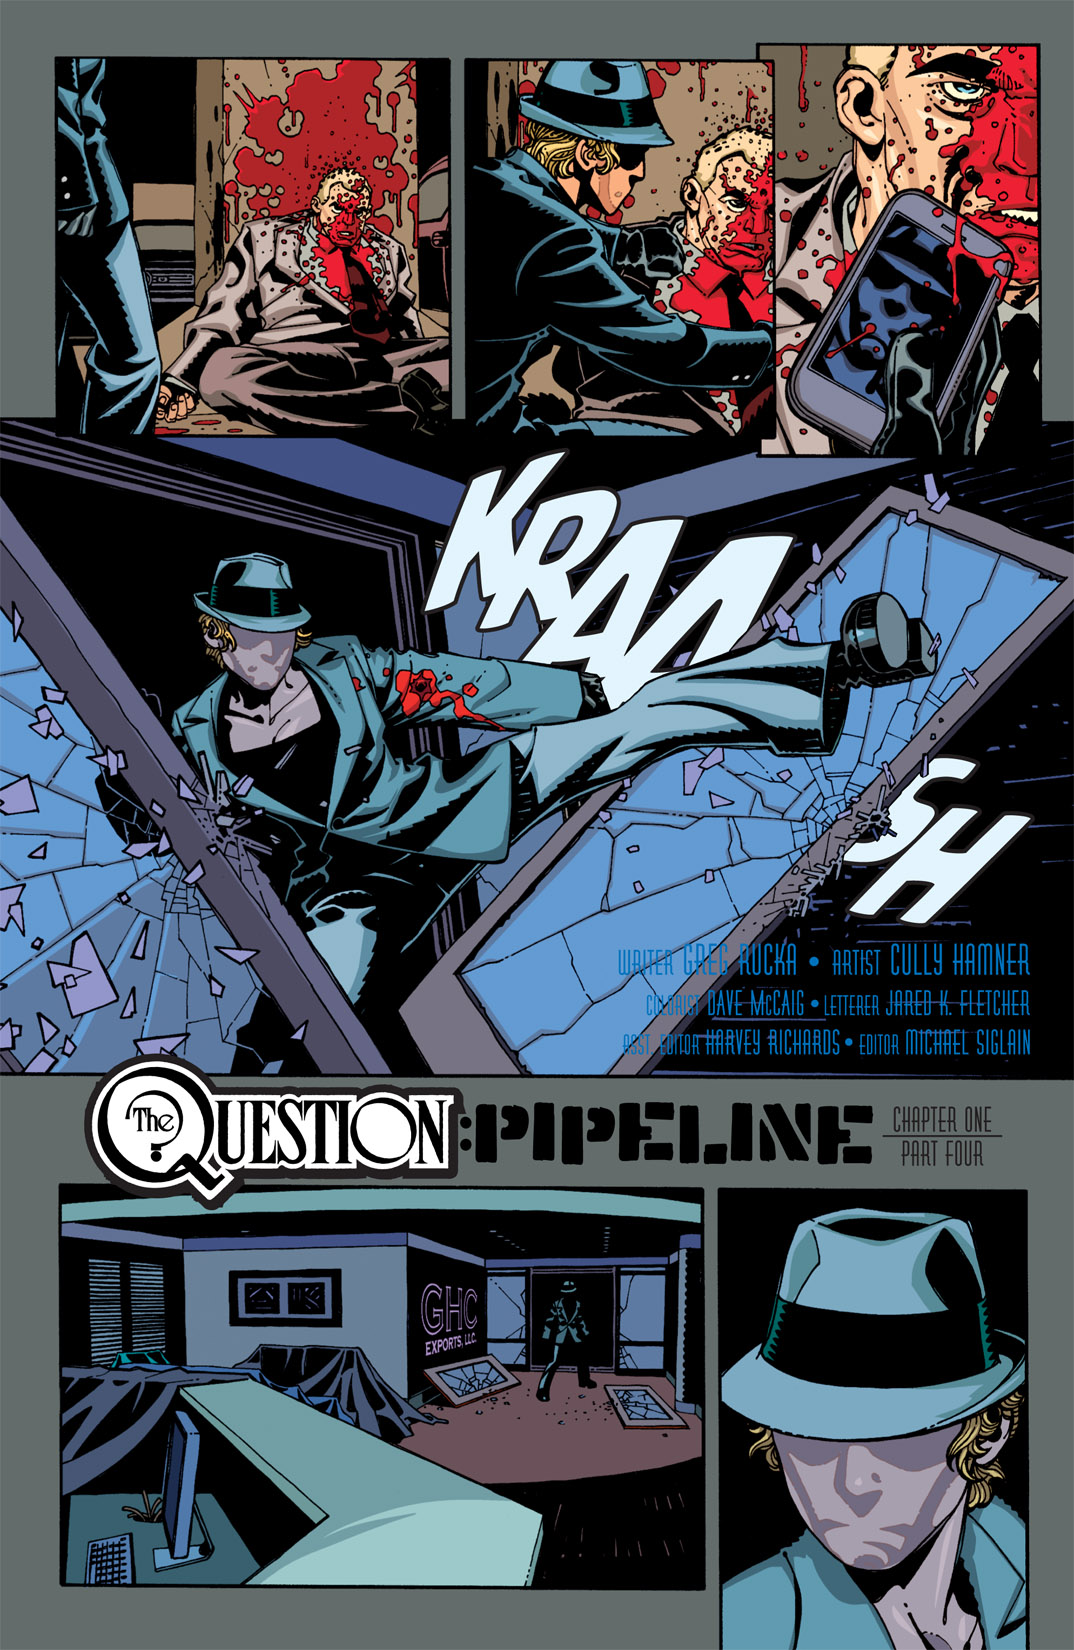 Read online The Question: Pipeline comic -  Issue # TPB - 25